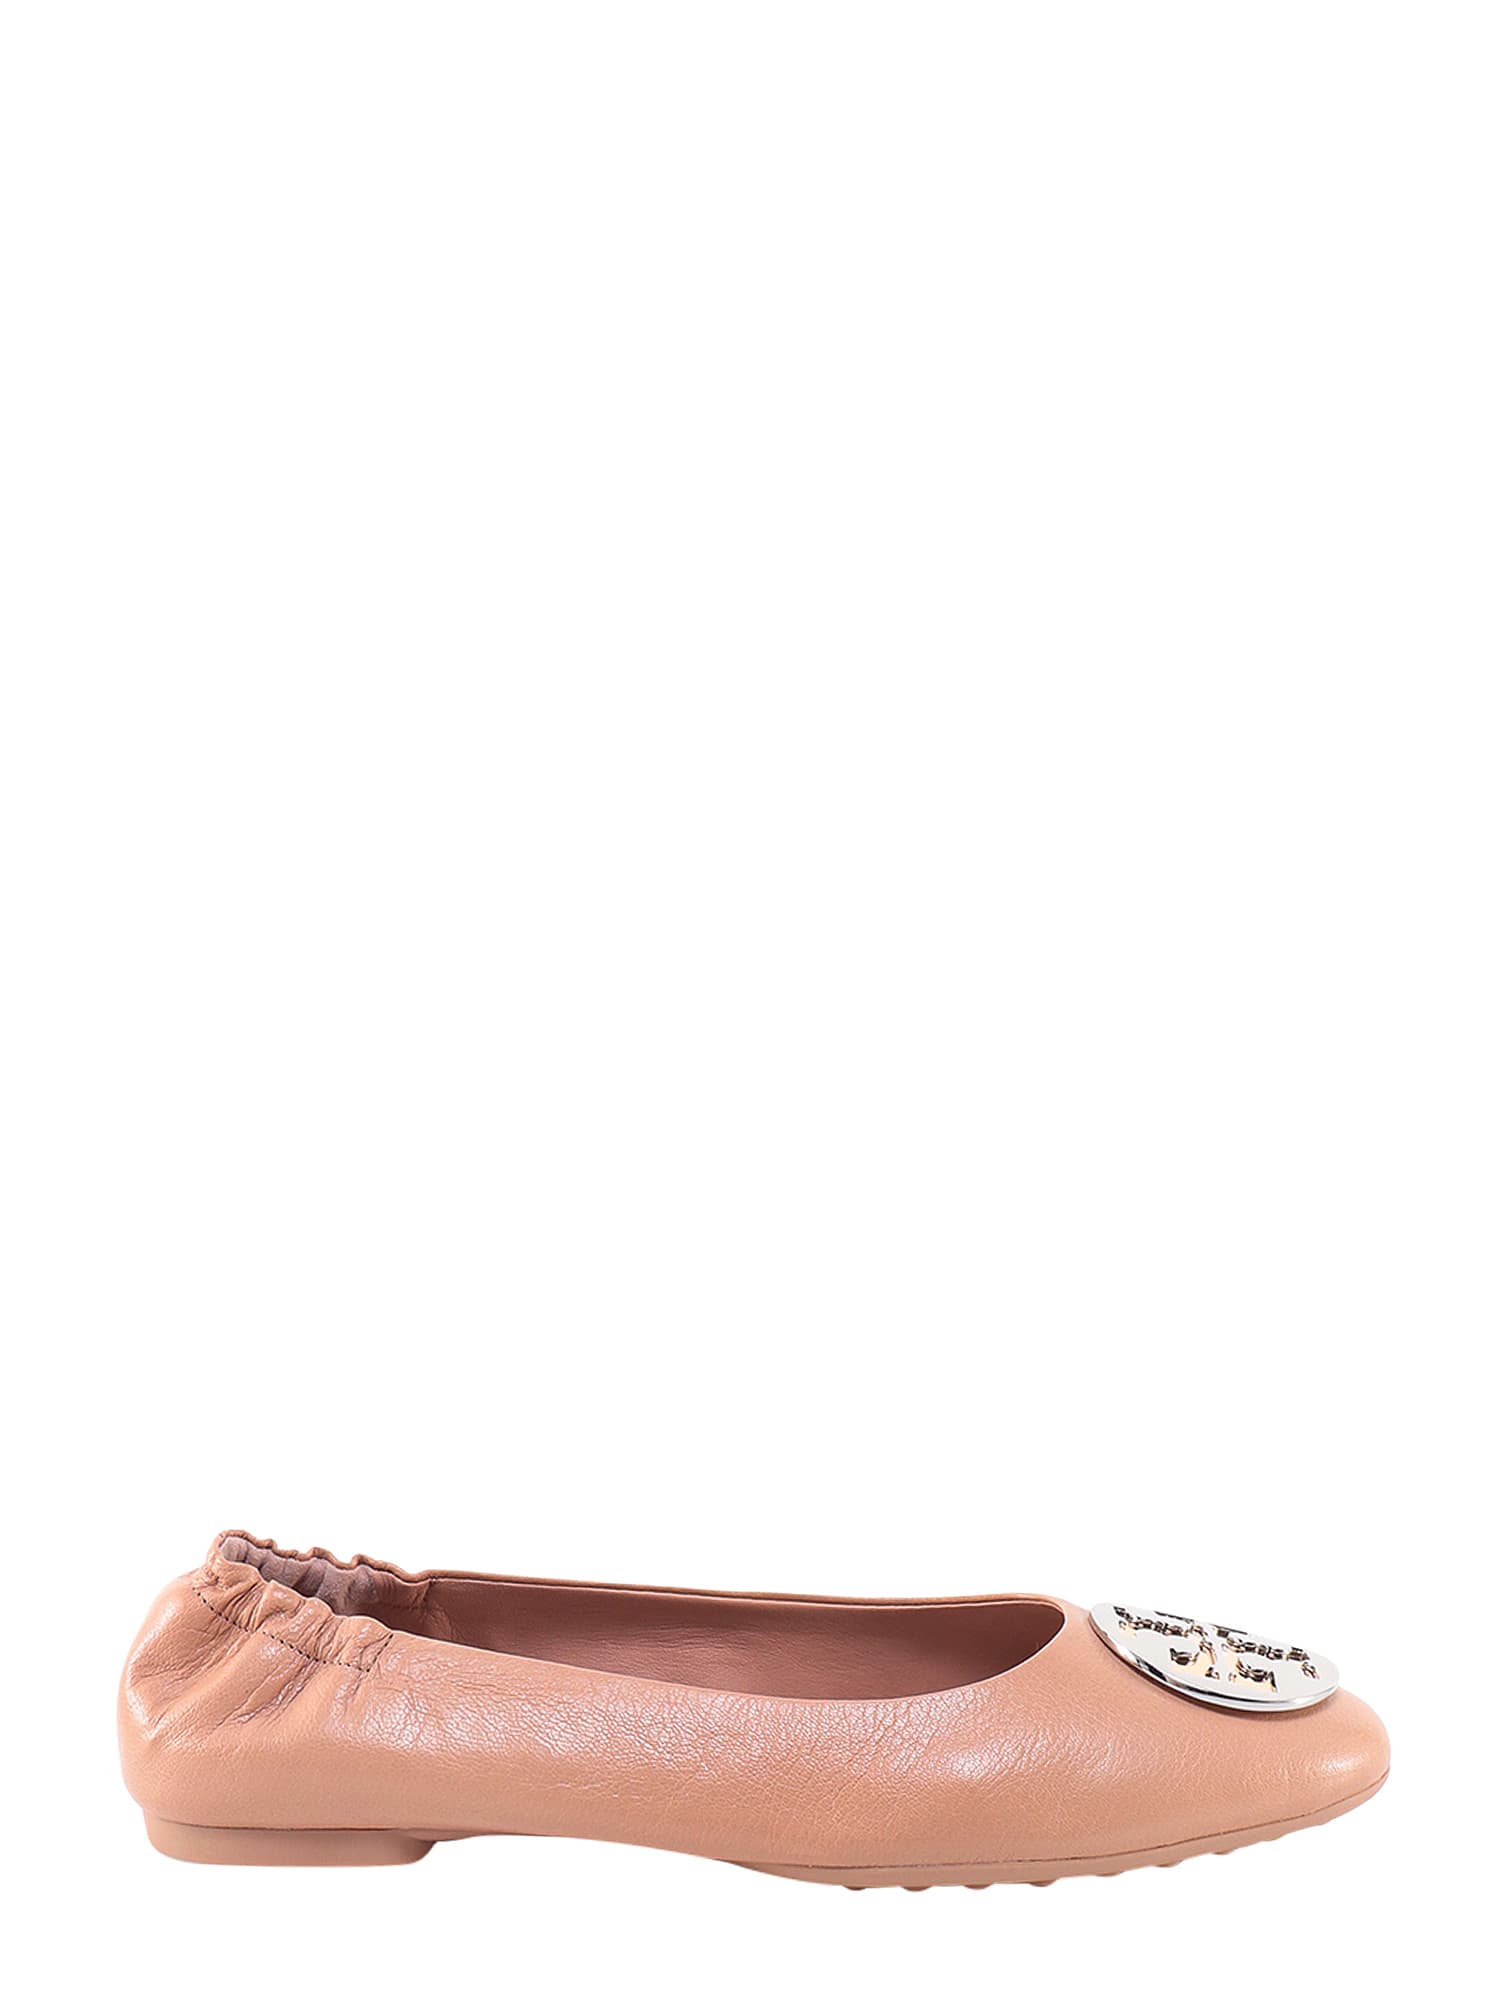 Tory Burch Ballerinas Flat Shoes In Sand